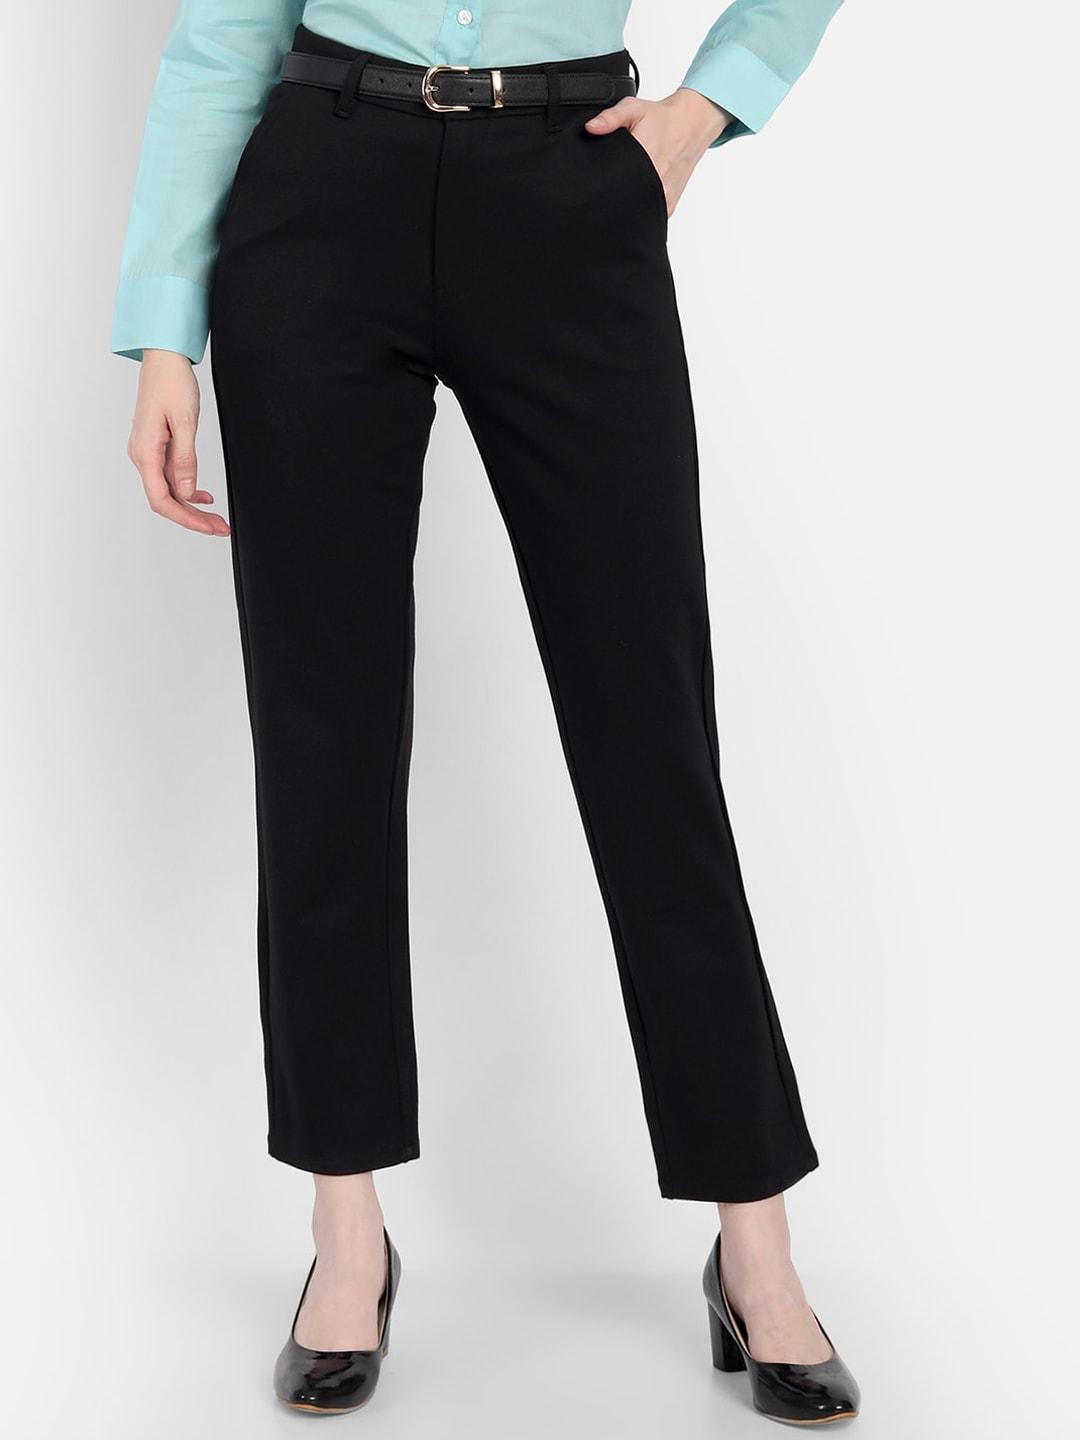 broadstar-women-relaxed-slim-fit-high-rise-stretchable-easy-wash-formal-trousers